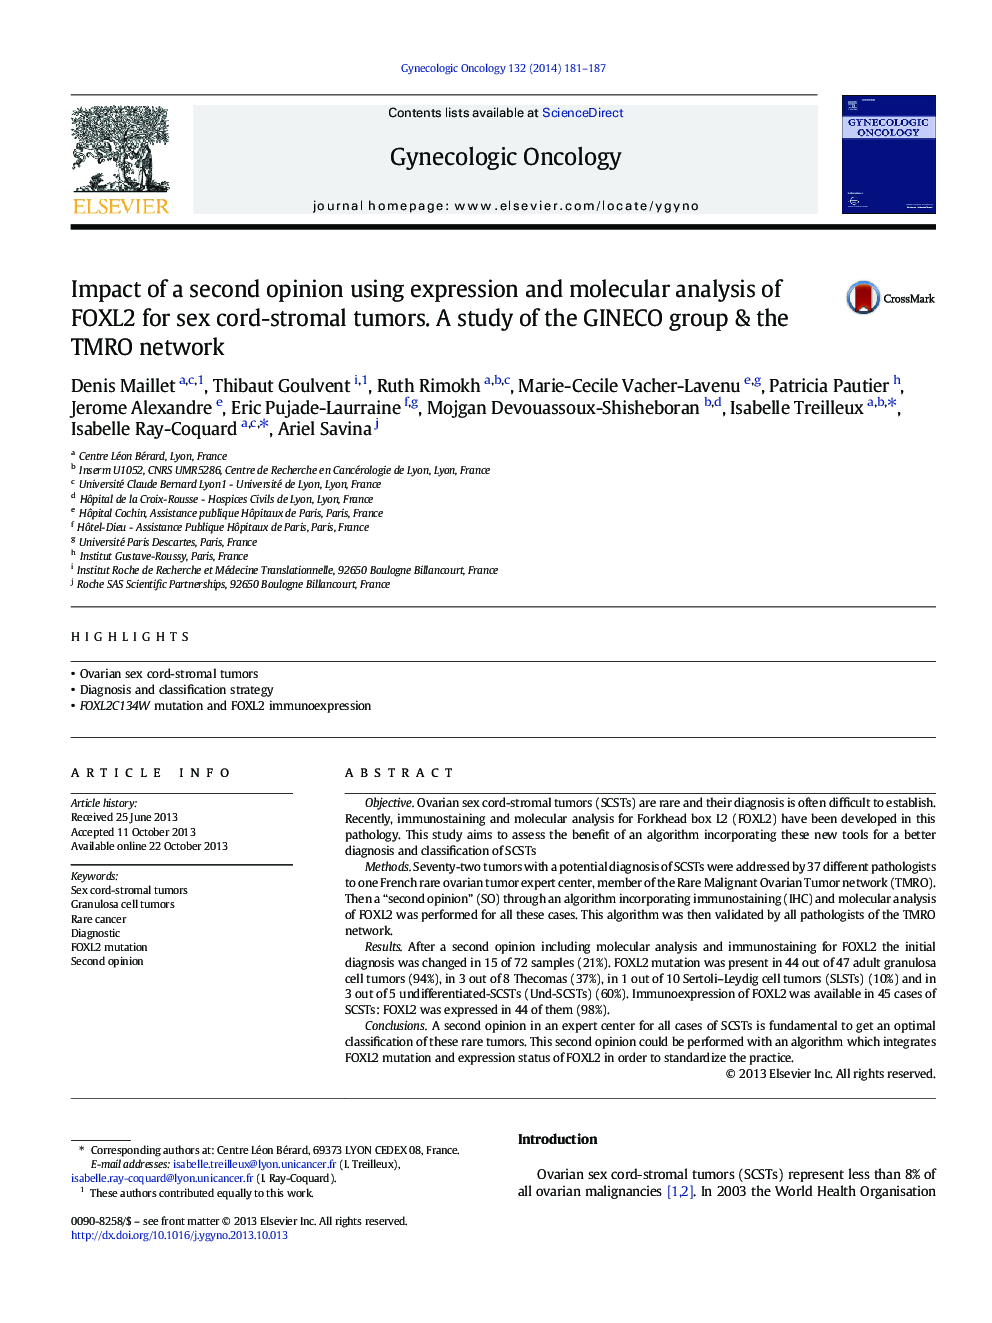 Impact of a second opinion using expression and molecular analysis of FOXL2 for sex cord-stromal tumors. A study of the GINECO group & the TMRO network